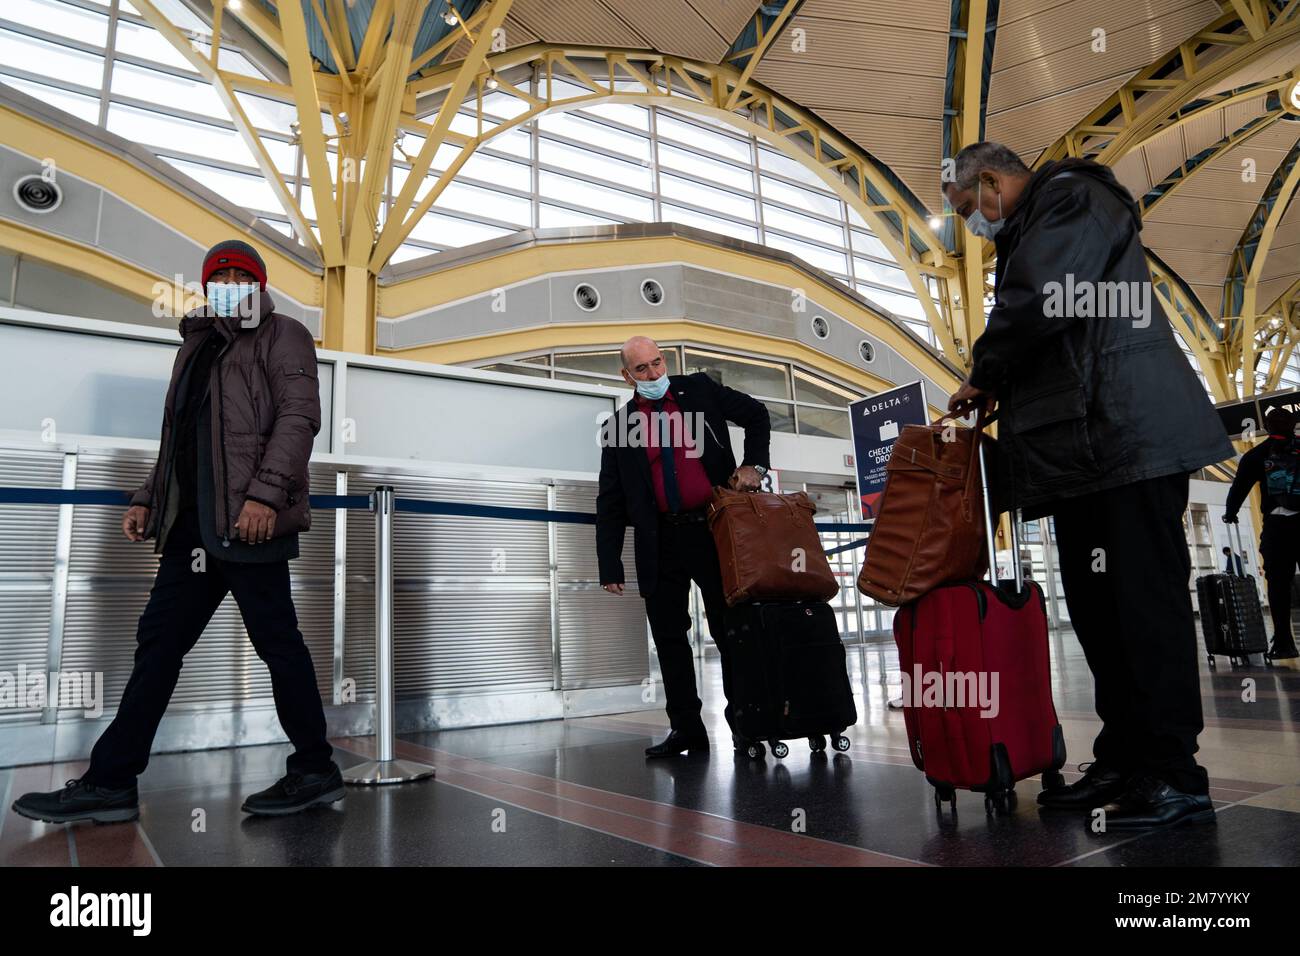 Washington, USA. 11th Jan, 2023. Passengers are seen at Ronald Reagan Washington National Airport in Arlington, Virginia, the United States, Jan. 11, 2023. The Federal Aviation Administration (FAA) said Wednesday morning it is lifting the ground stop as normal air traffic operations are resuming gradually across the United States following a system outage. The FAA, which regulates all aspects of civil aviation in the country, wrote in its latest update that it continues to look into the cause of the initial problem. Credit: Liu Jie/Xinhua/Alamy Live News Stock Photo